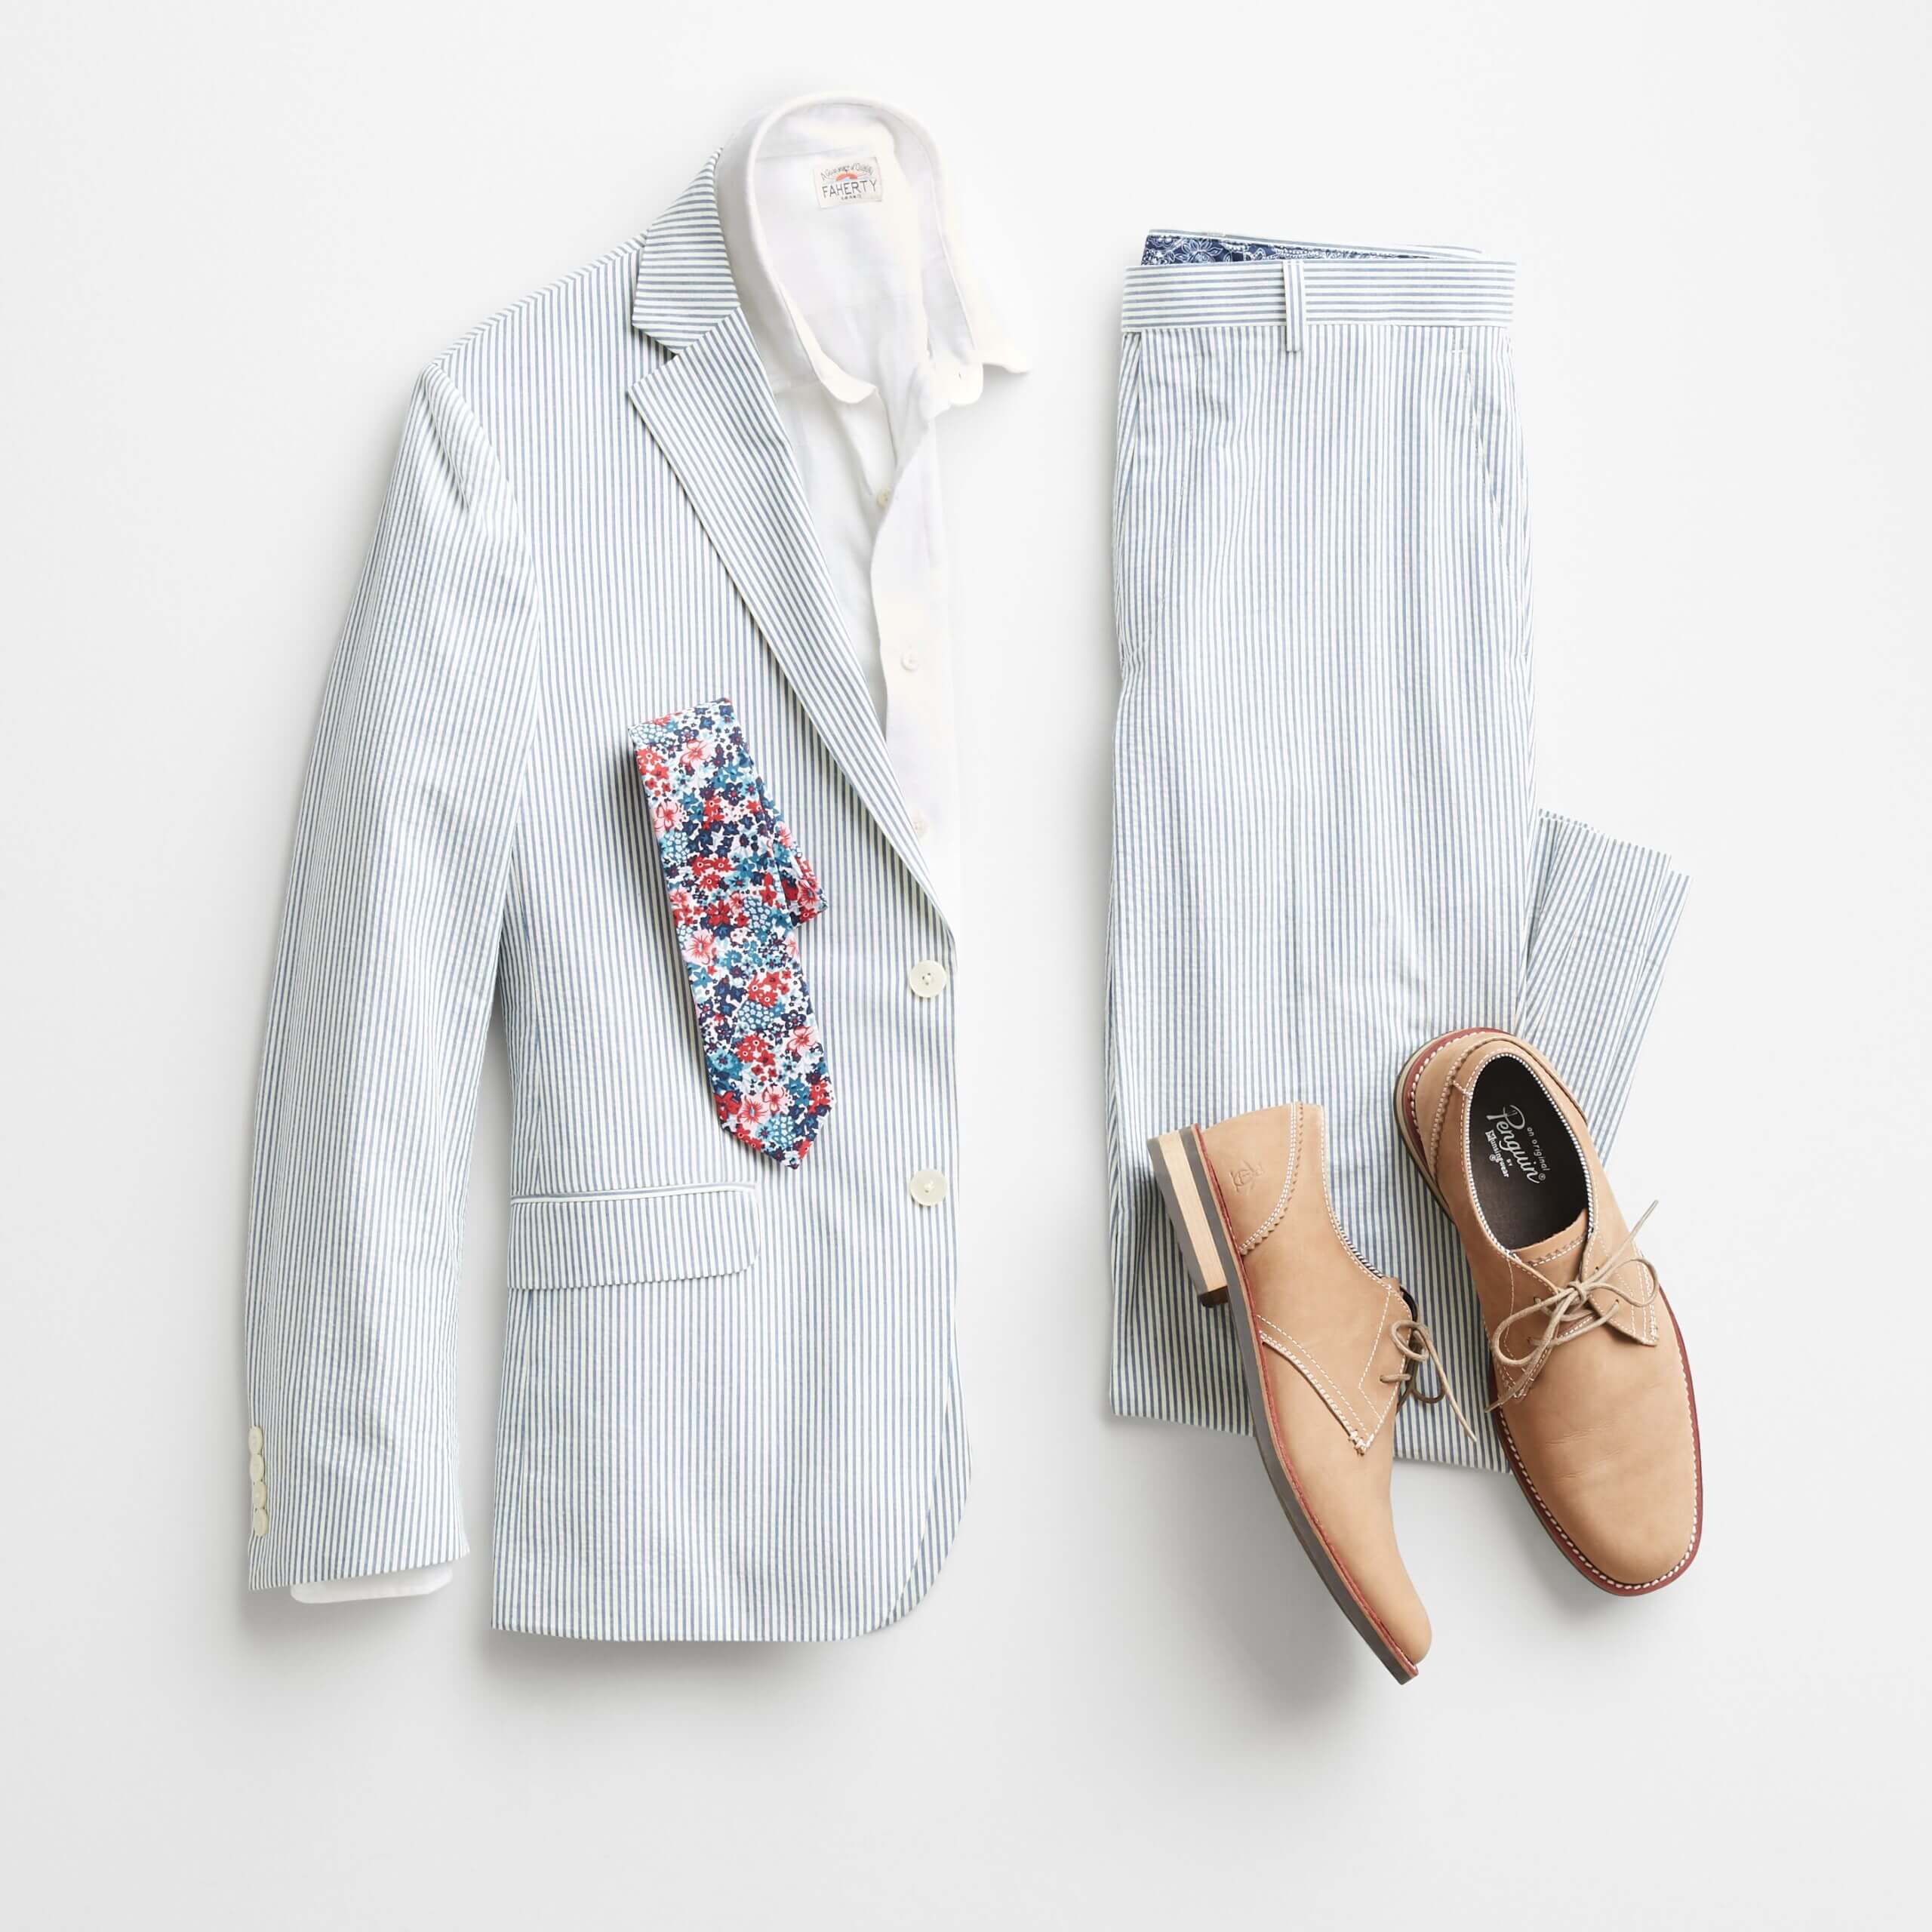 What To Wear To A Wedding, Mens Style Guide, Politix